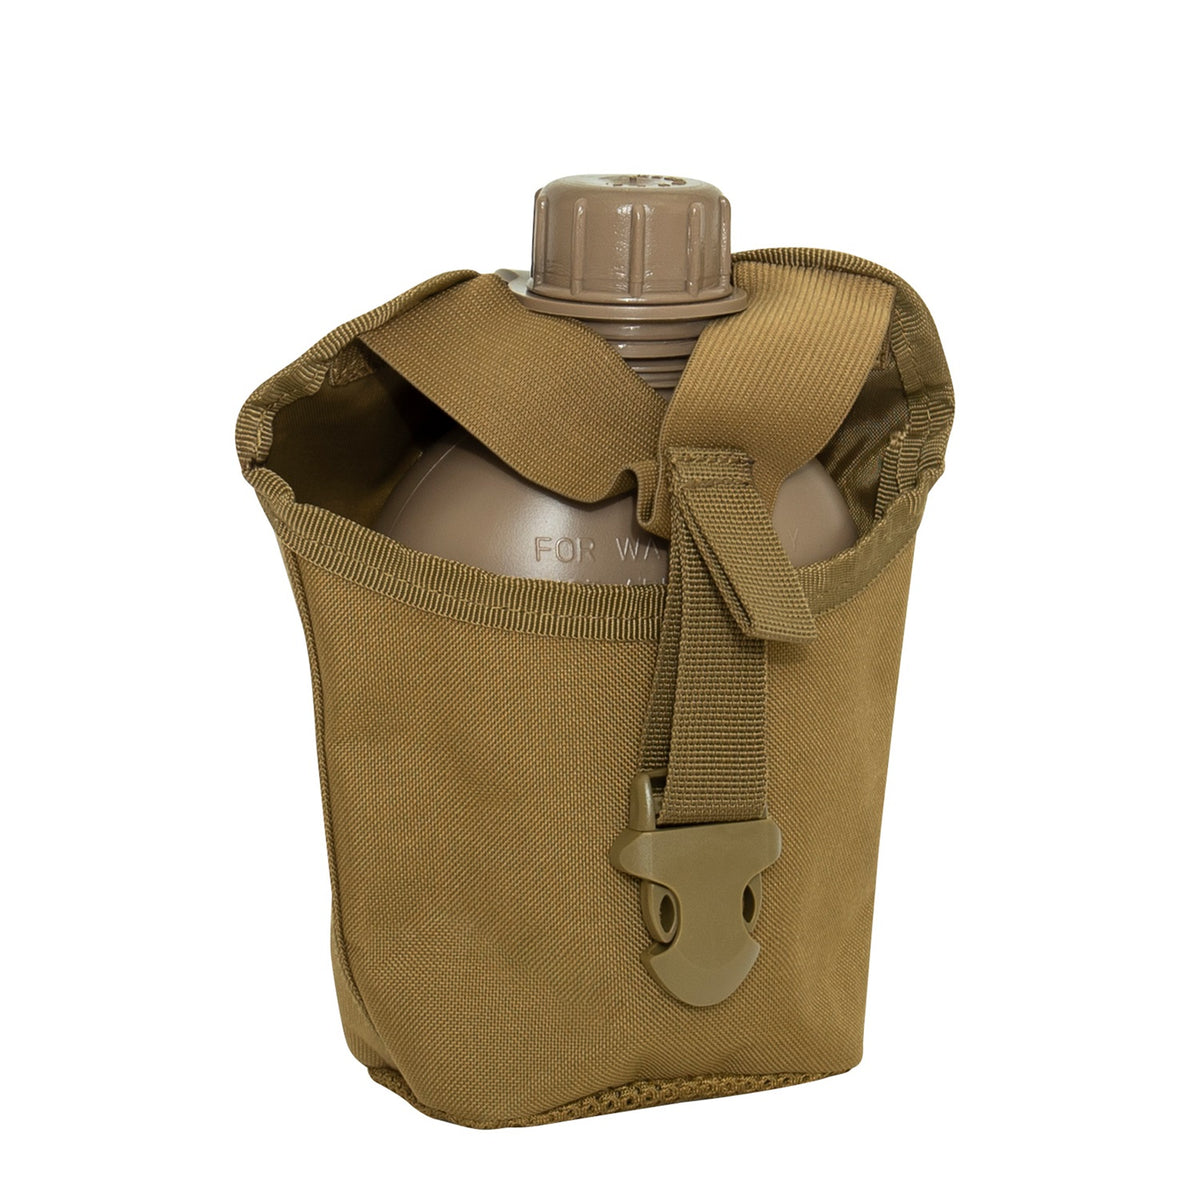 Rothco MOLLE Compatible 1 Quart Canteen Pouch / Cover Coyote Brown